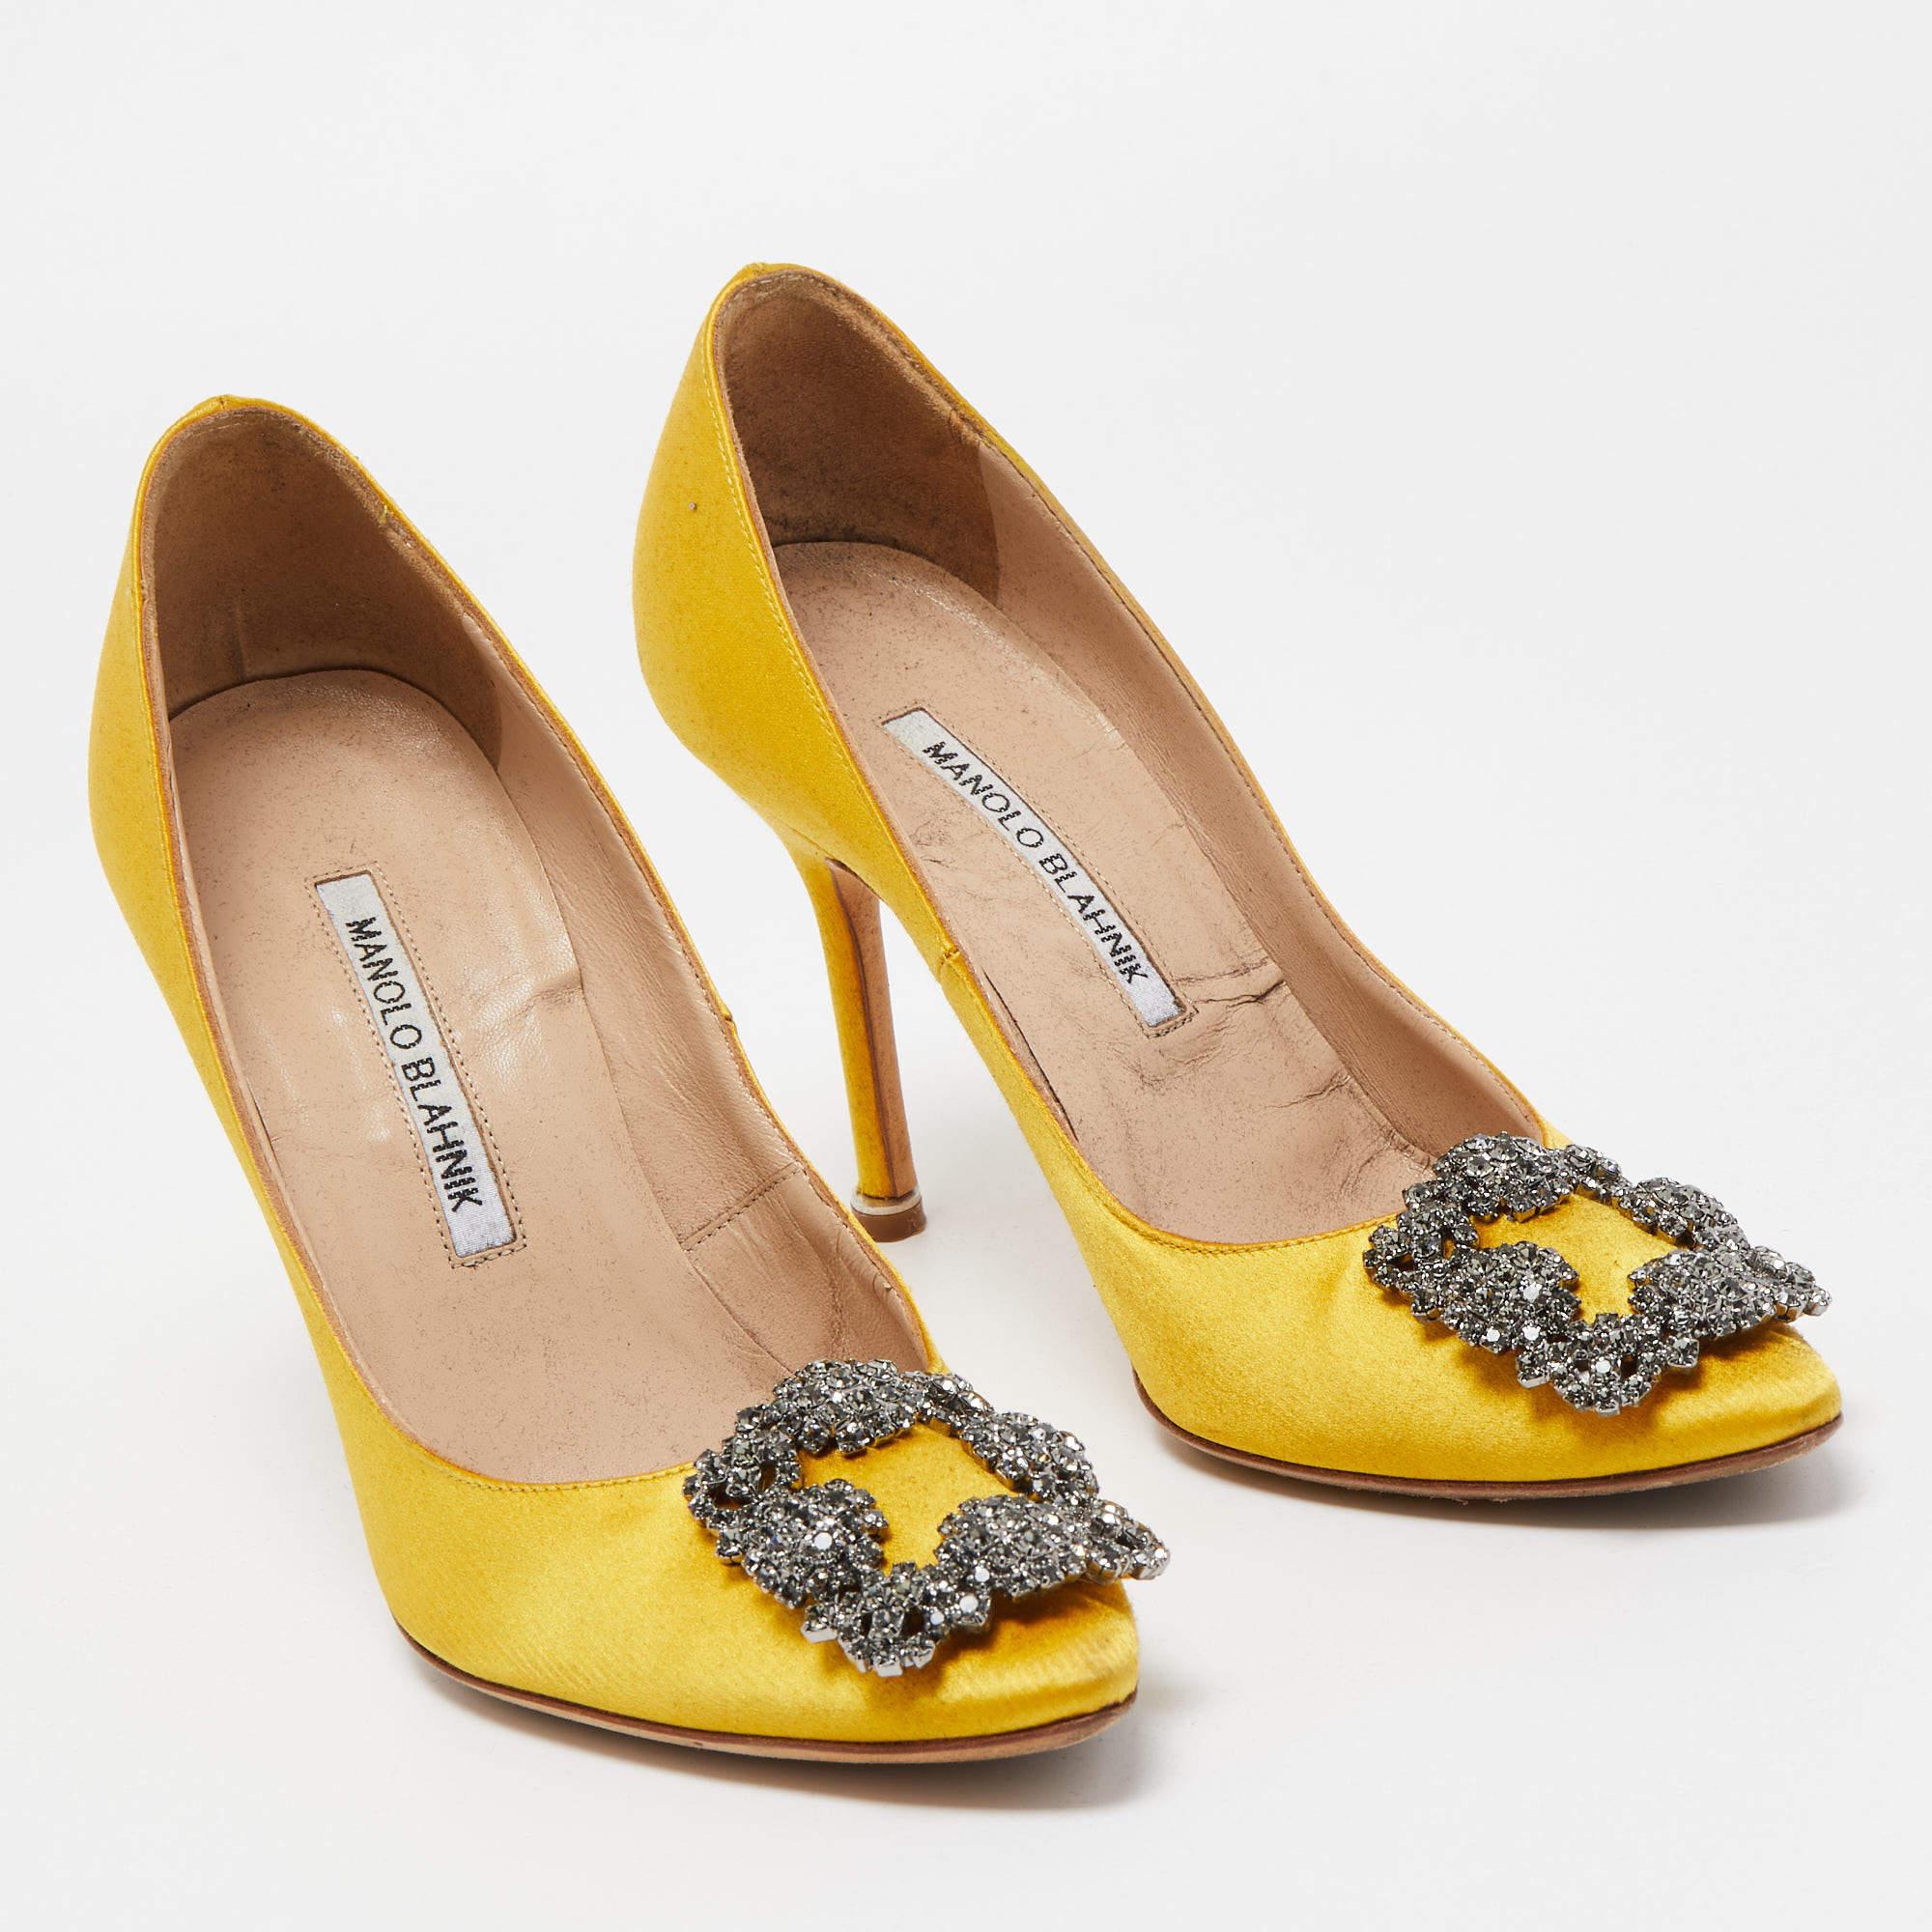 The 10cm heels of this pair of Manolo Blahnik pumps will reflect grace and luxury in every step. Made from satin, it is made striking with crystal-embellished buckle detailing on the toes and exhibits branded insoles.

